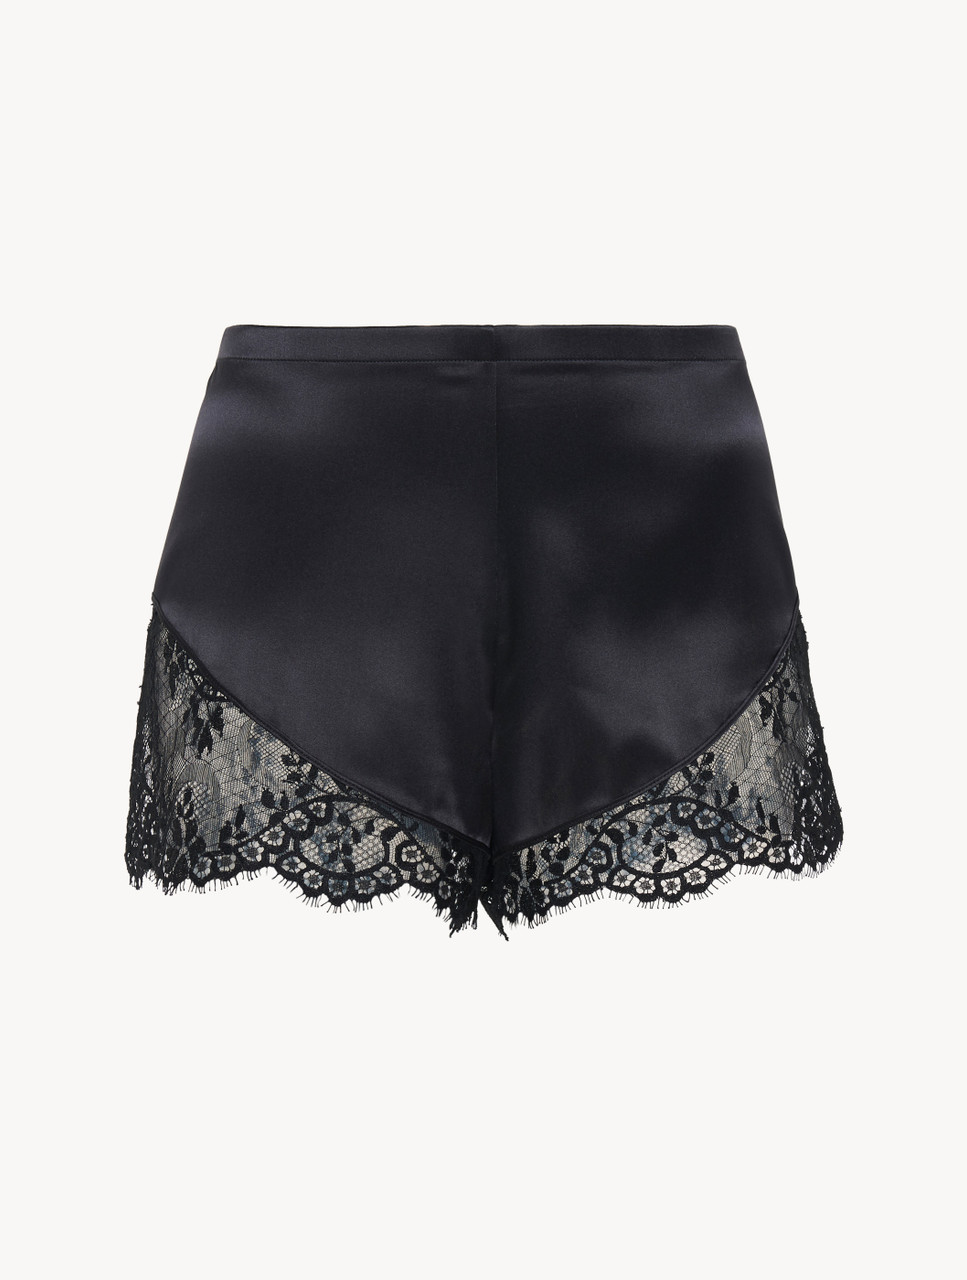 Luxury Silk Pajama Shorts in Black with Lace Trim